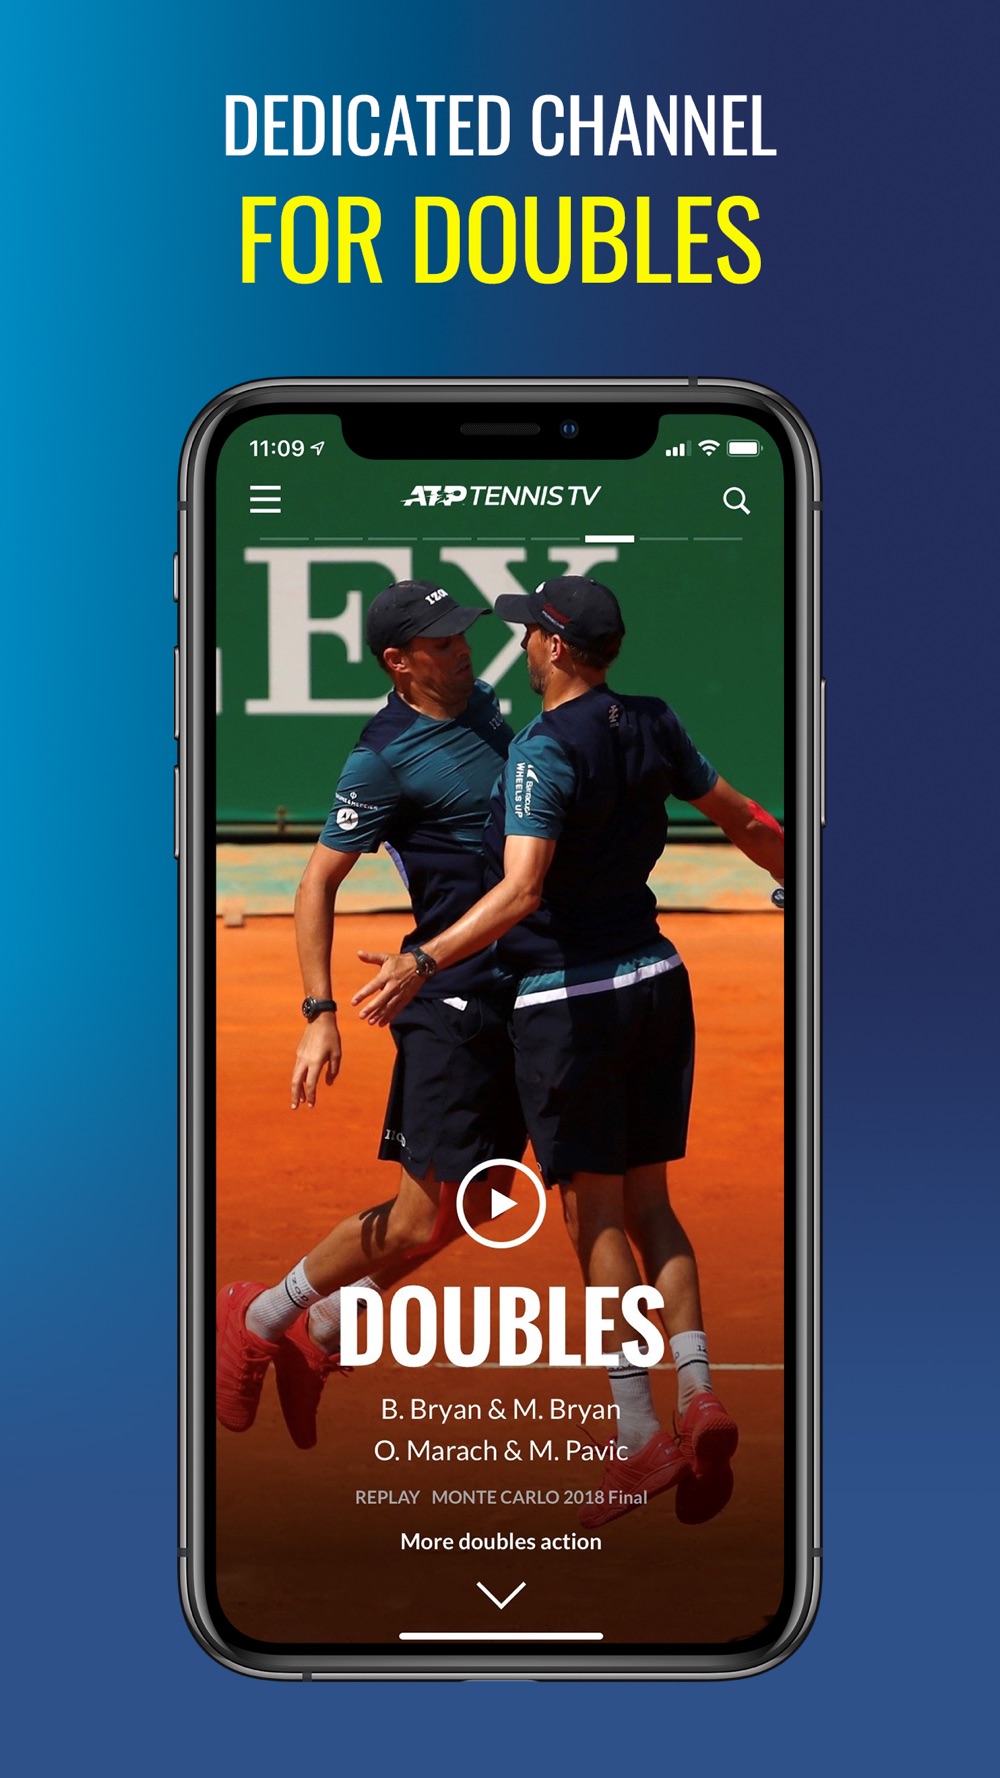 Tennis TV - Live Streaming Free Download App for iPhone - STEPrimo.com